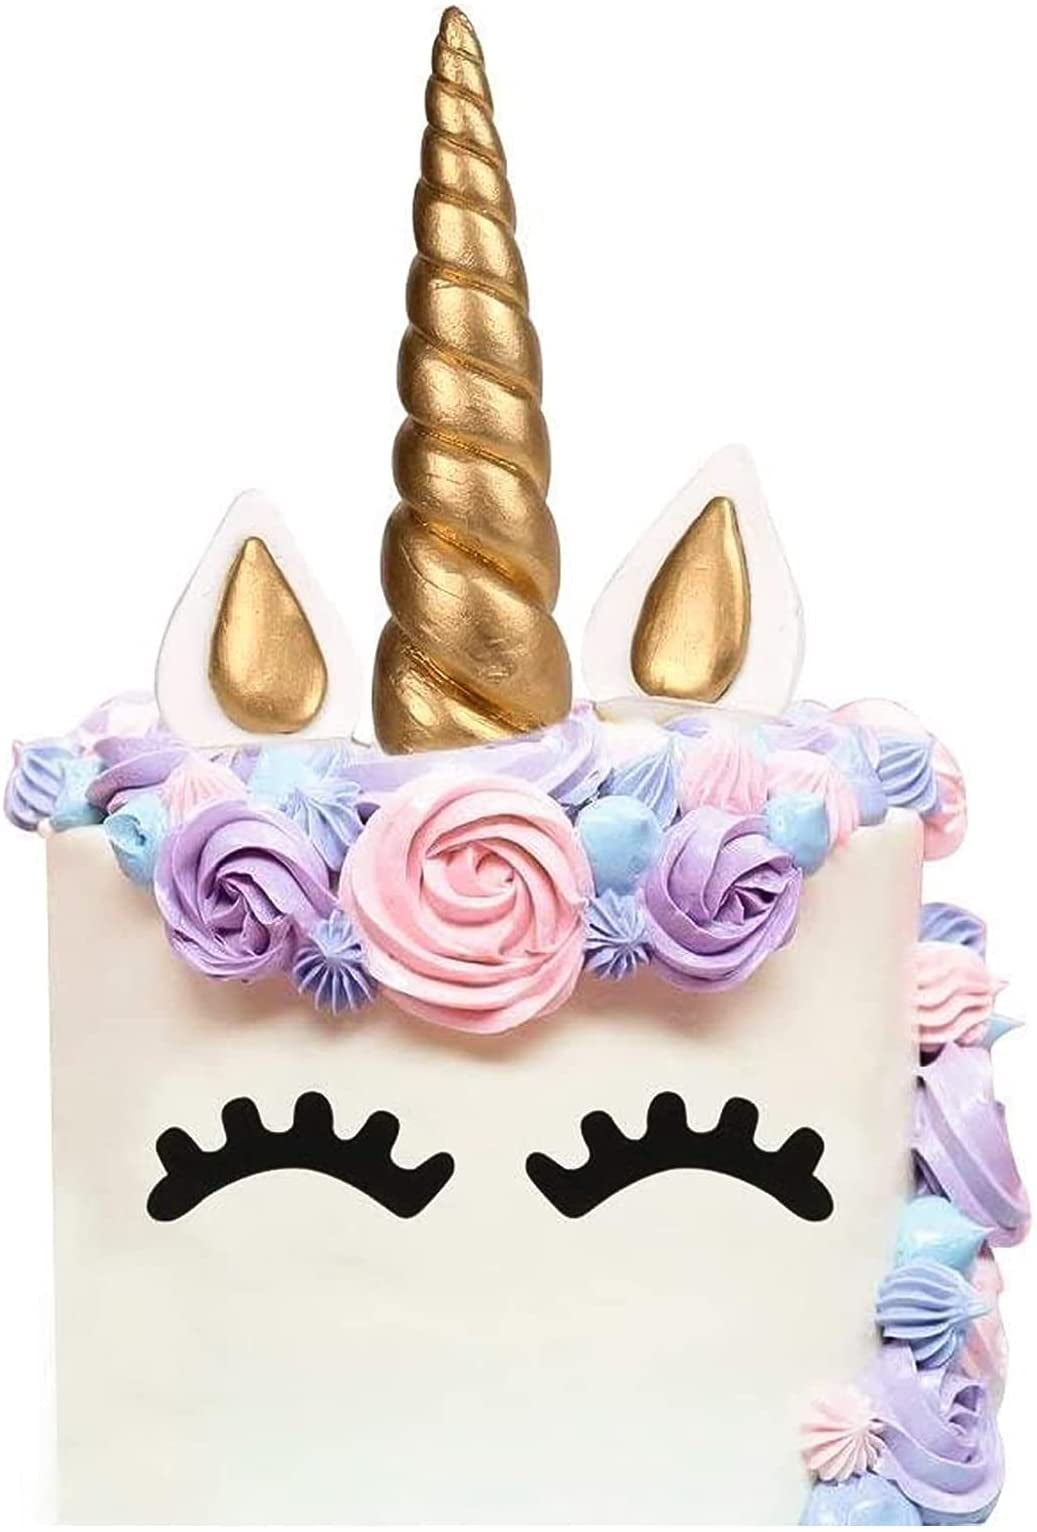 Cake Toppers Bigger Size Handmade Unicorn Birthday Cake Topper Gold Unicorn Horn Ears And Eyelash Set Unicorn Party Decoration For Birthday Party Baby Shower And Weddingset Of 5 79 X 137in Walmart Com